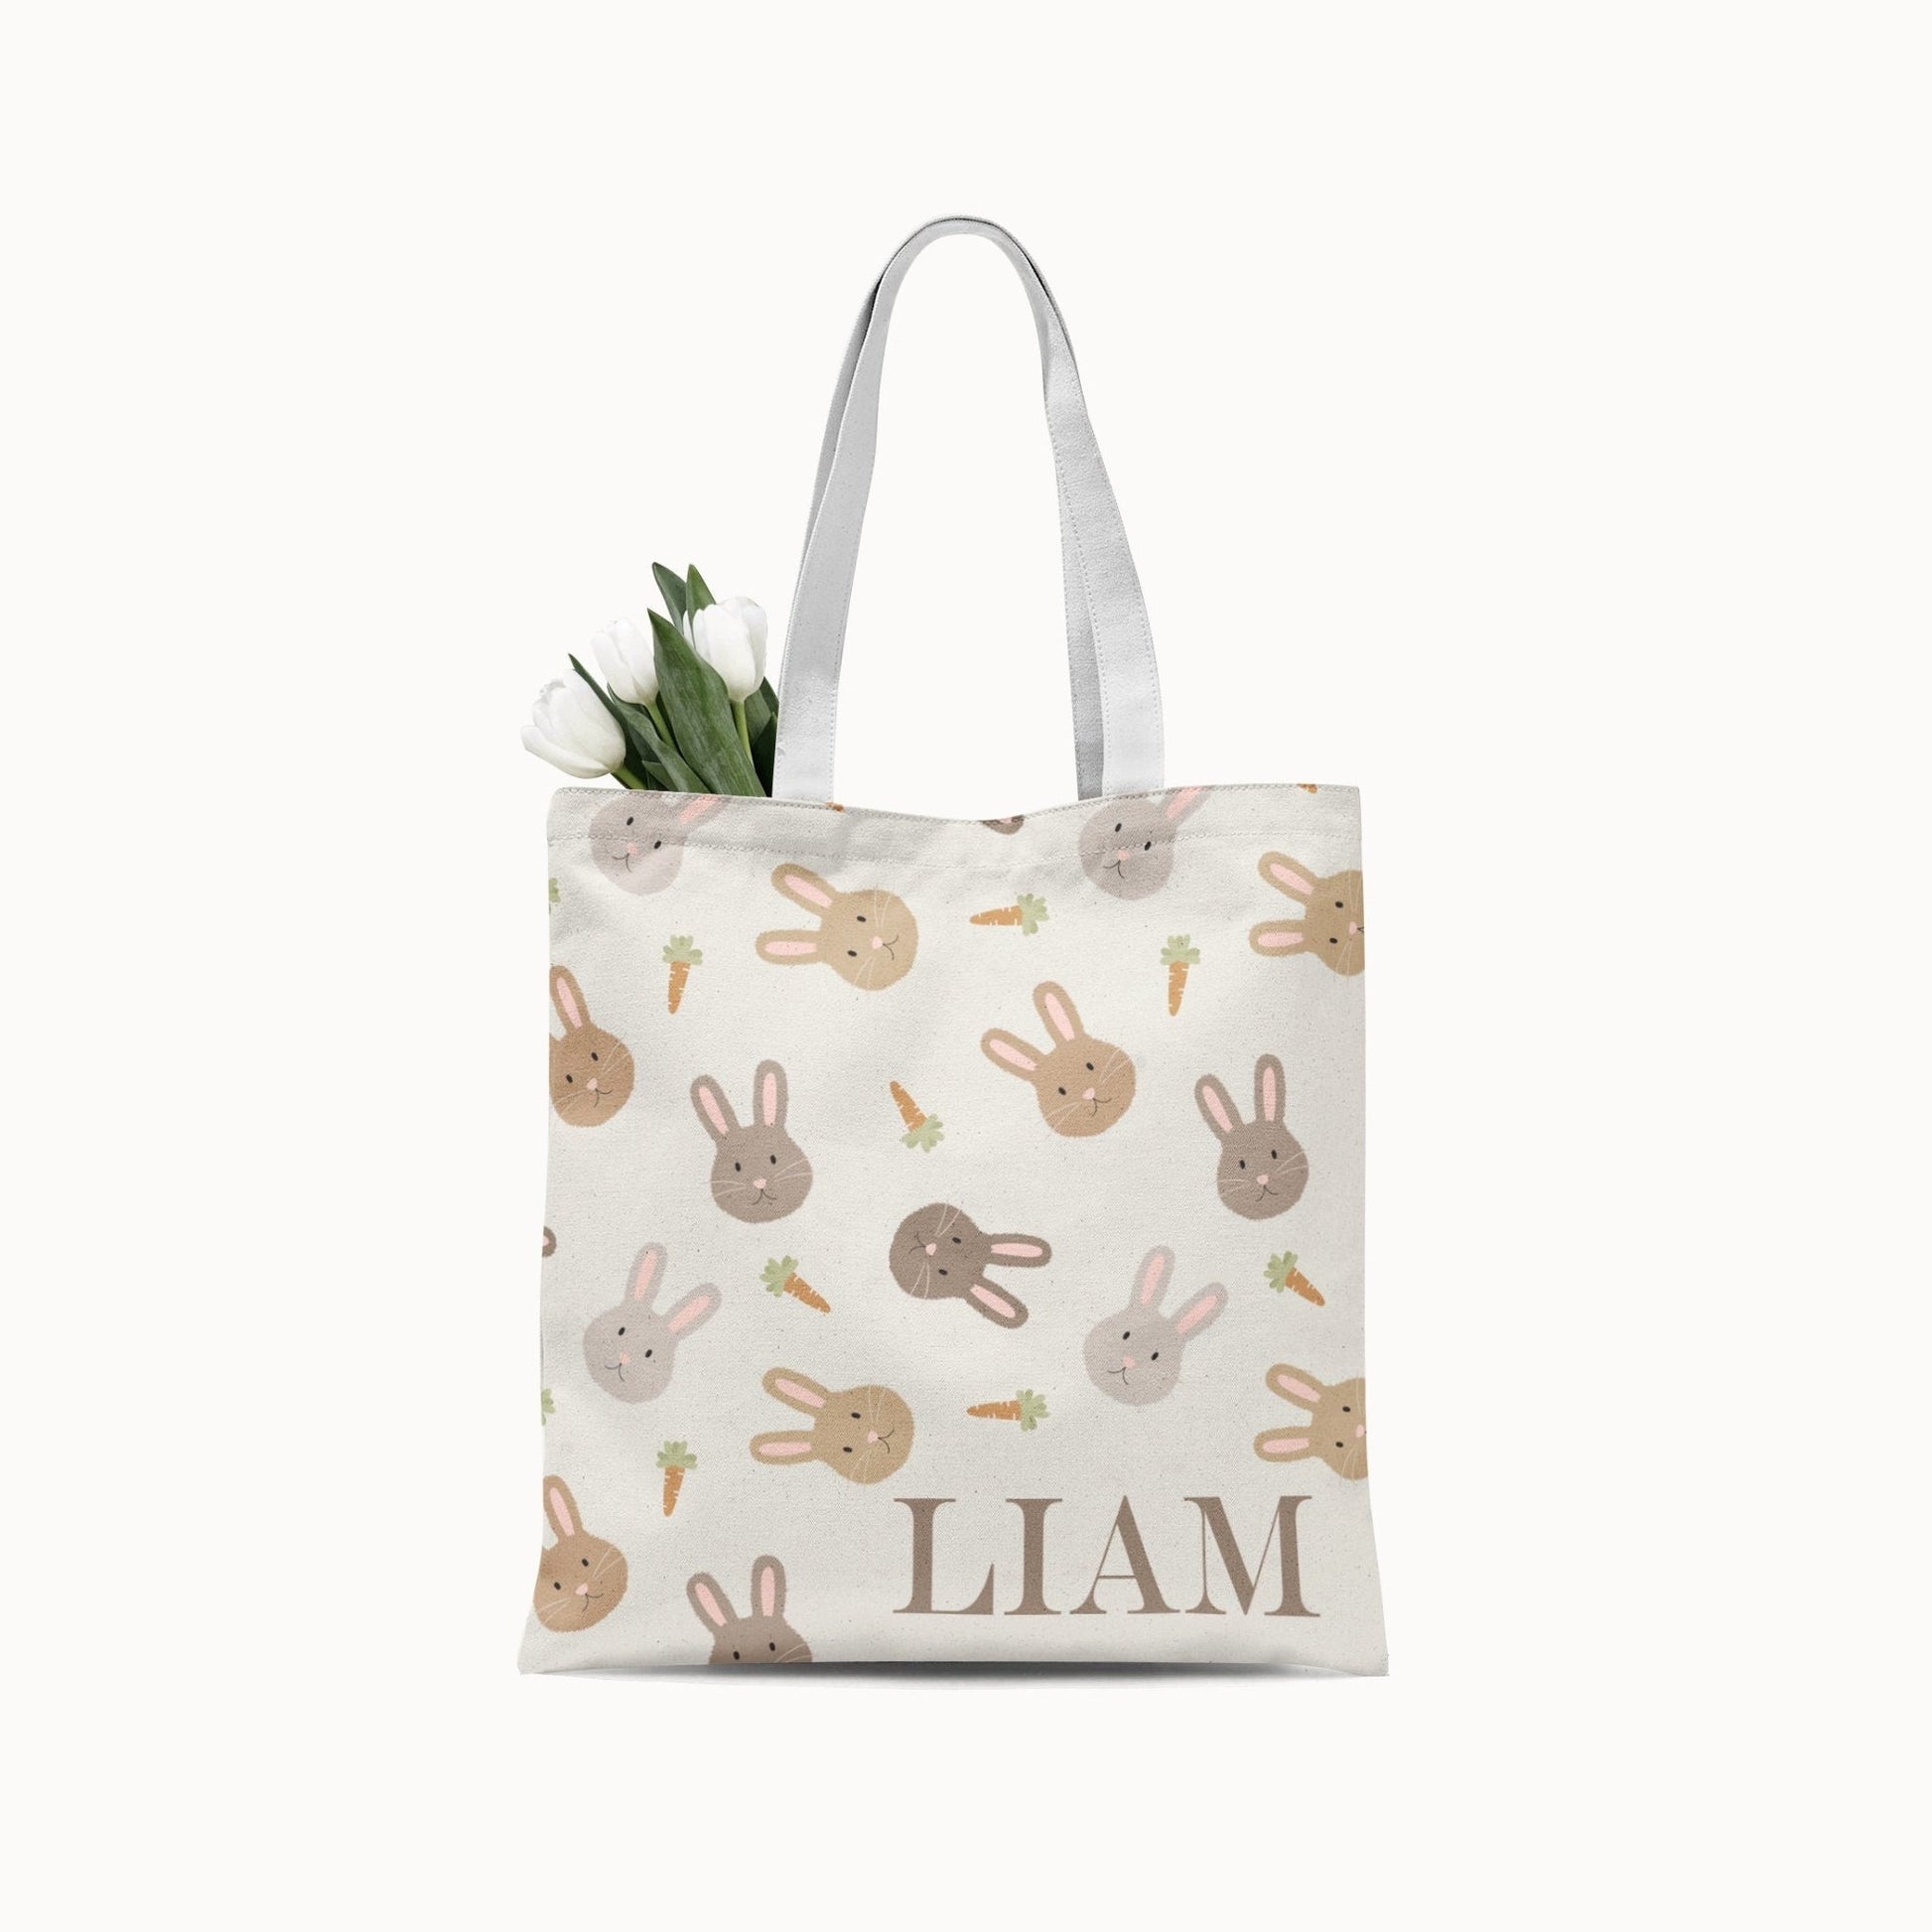 Boy's Custom Easter Tote Bag with Name, Kids Easter Egg Hunt Bag with Name - Squishy Cheeks